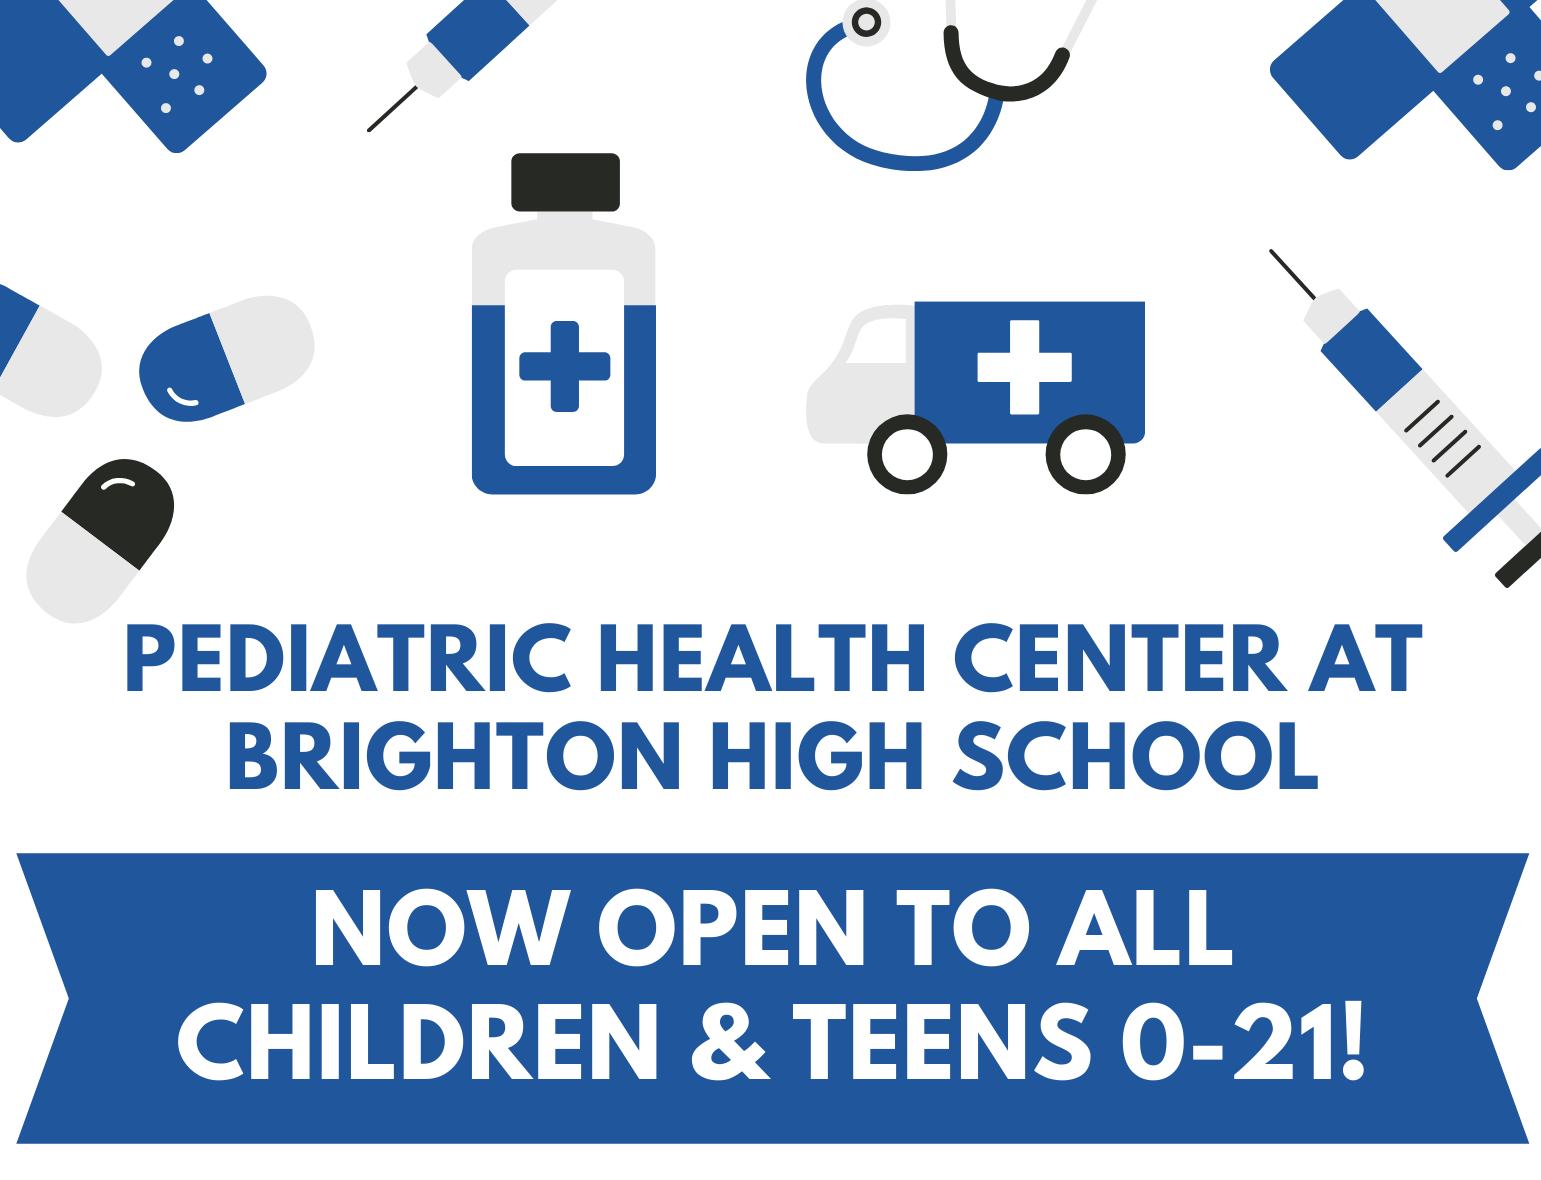 BHS Health Center Open to Community